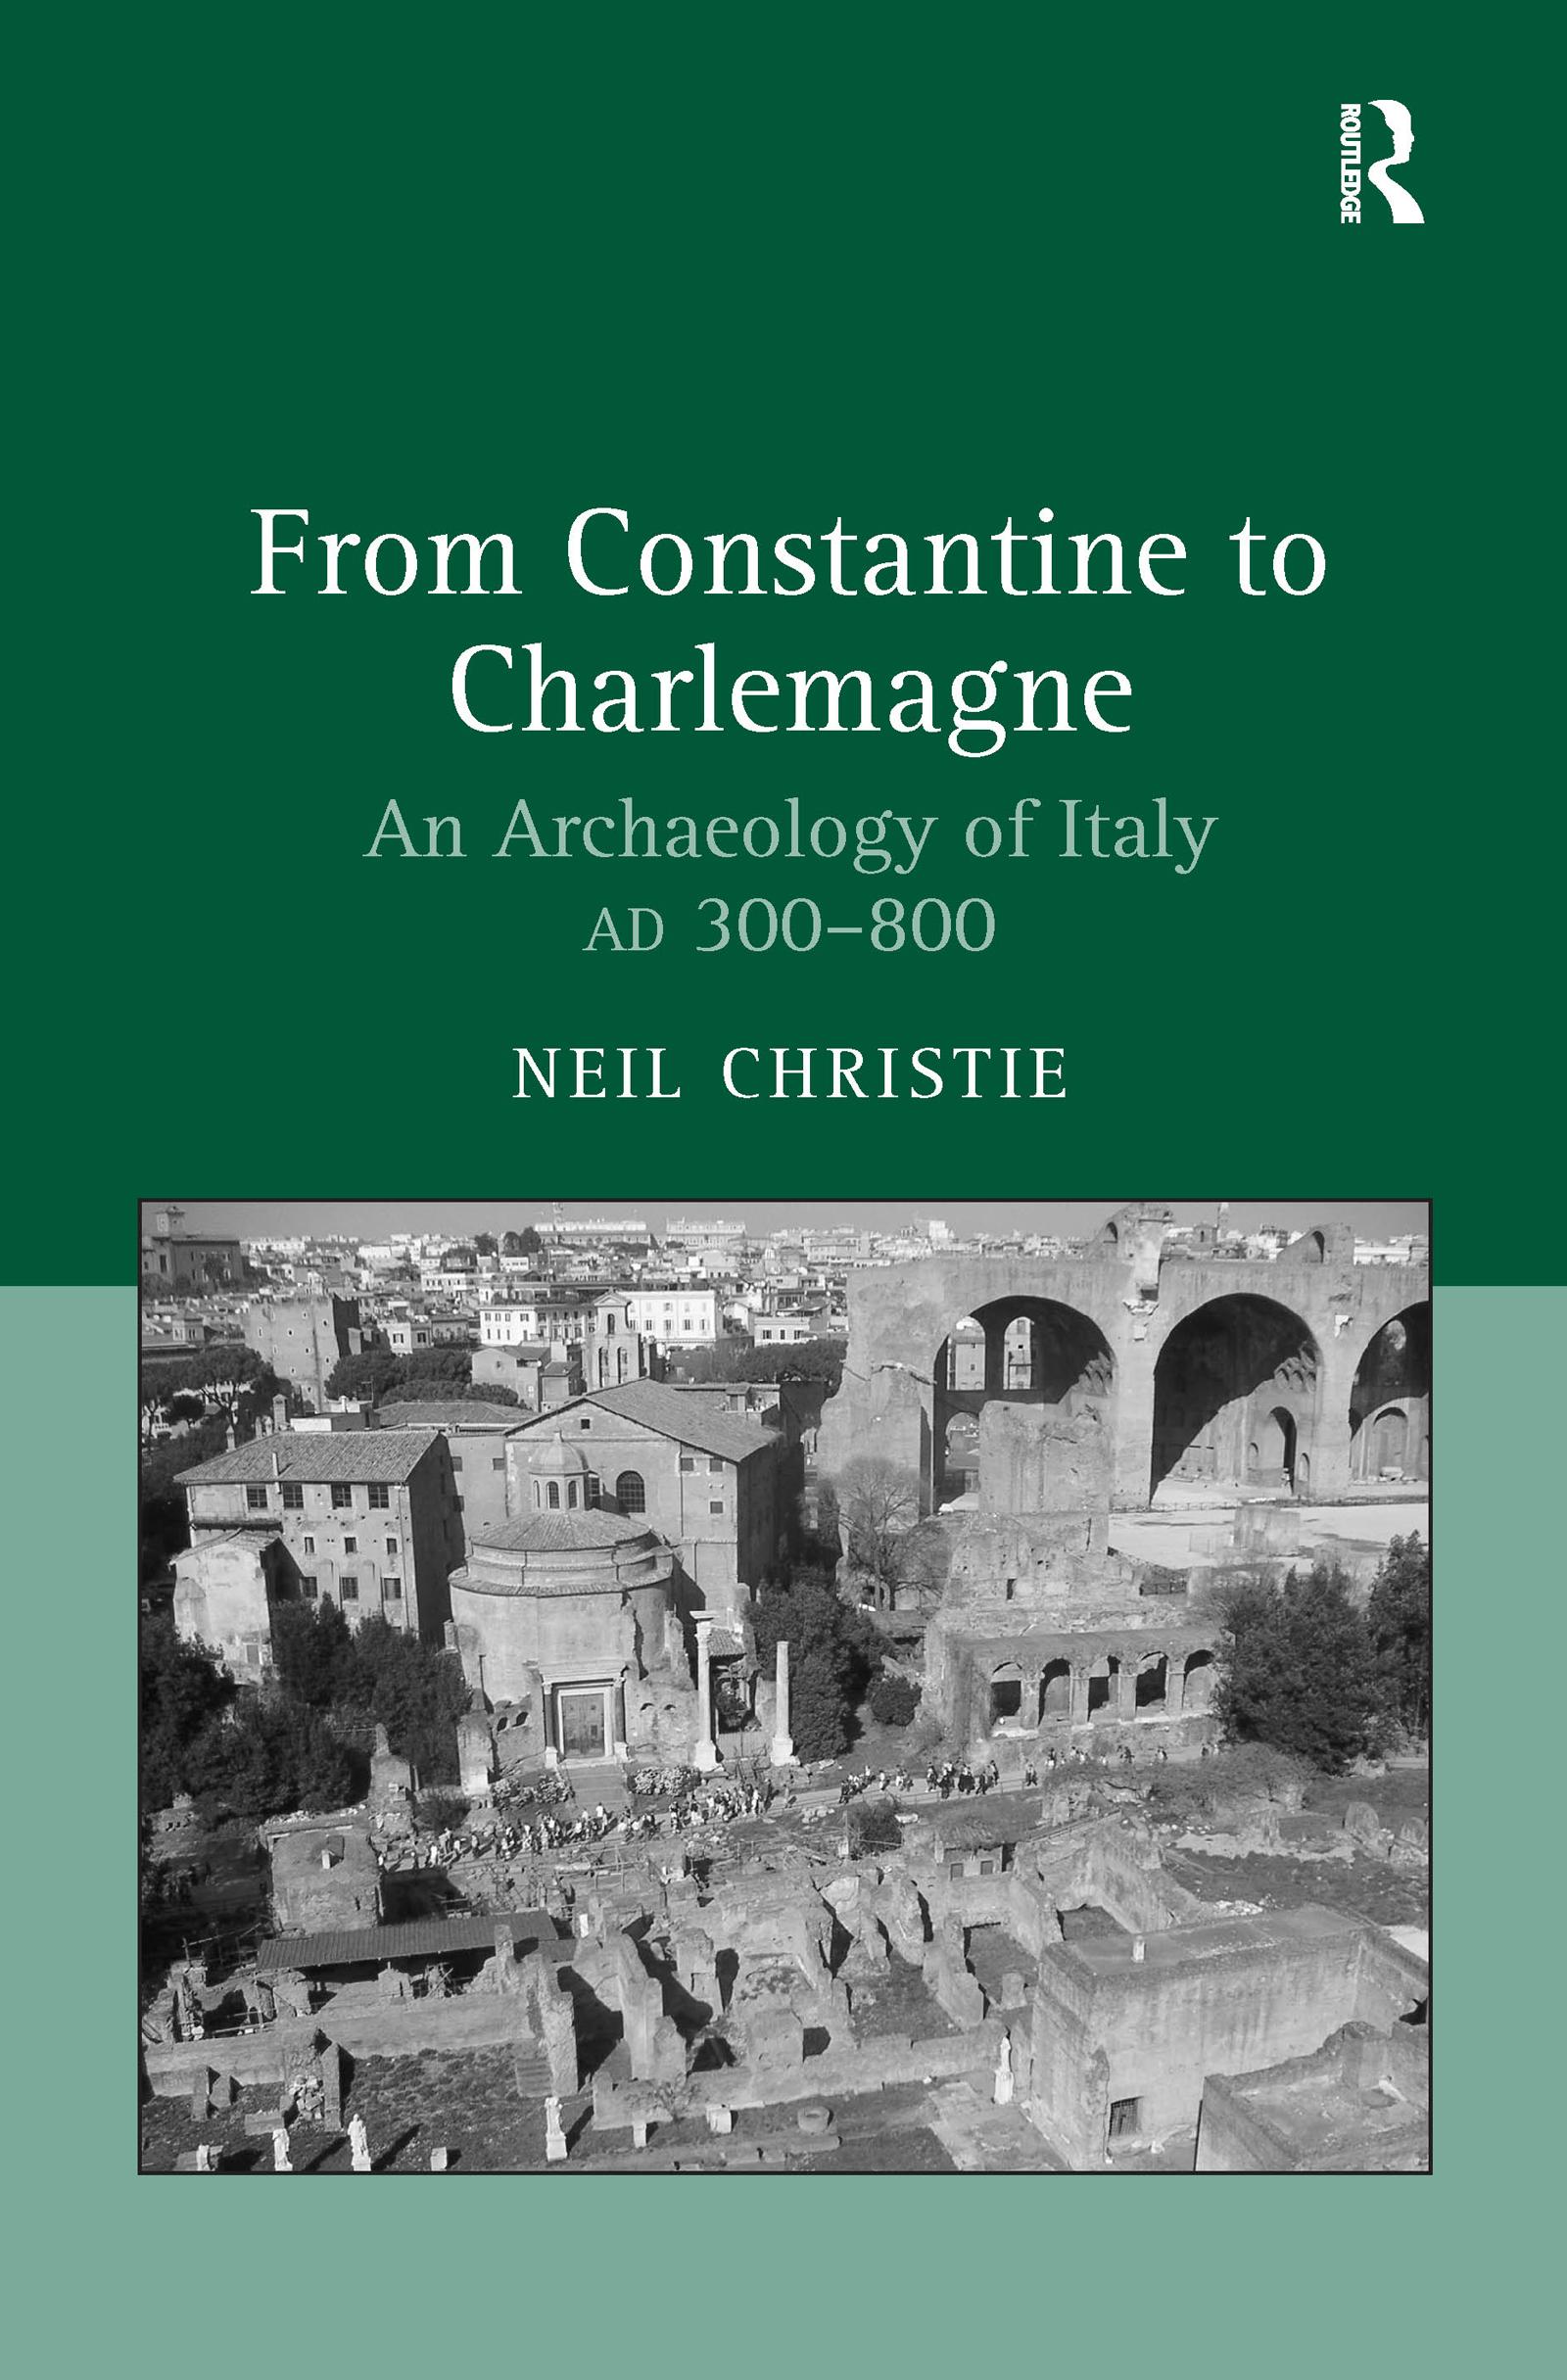 From Constantine to Charlemagne - Neil Christie